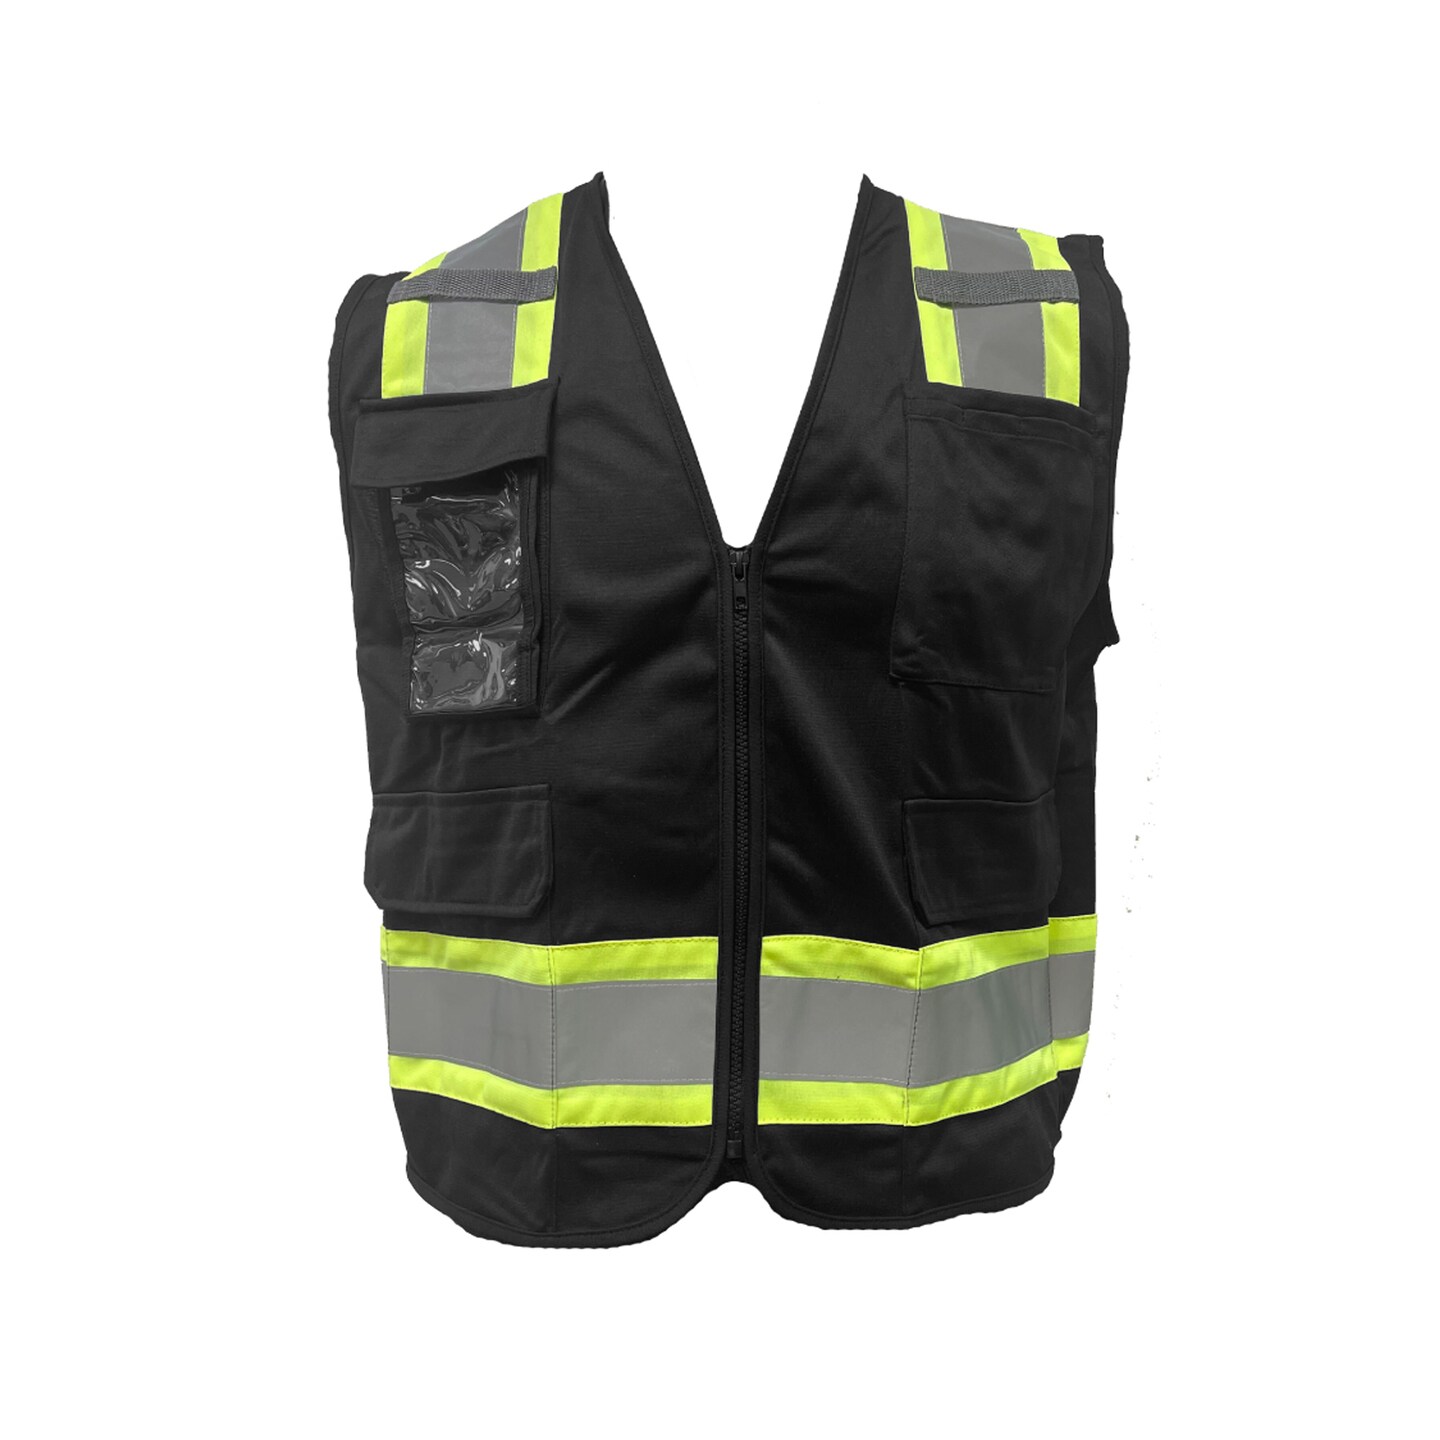 Multi Pack Safety Vests visibility and durability - Radyan Reflective Vest